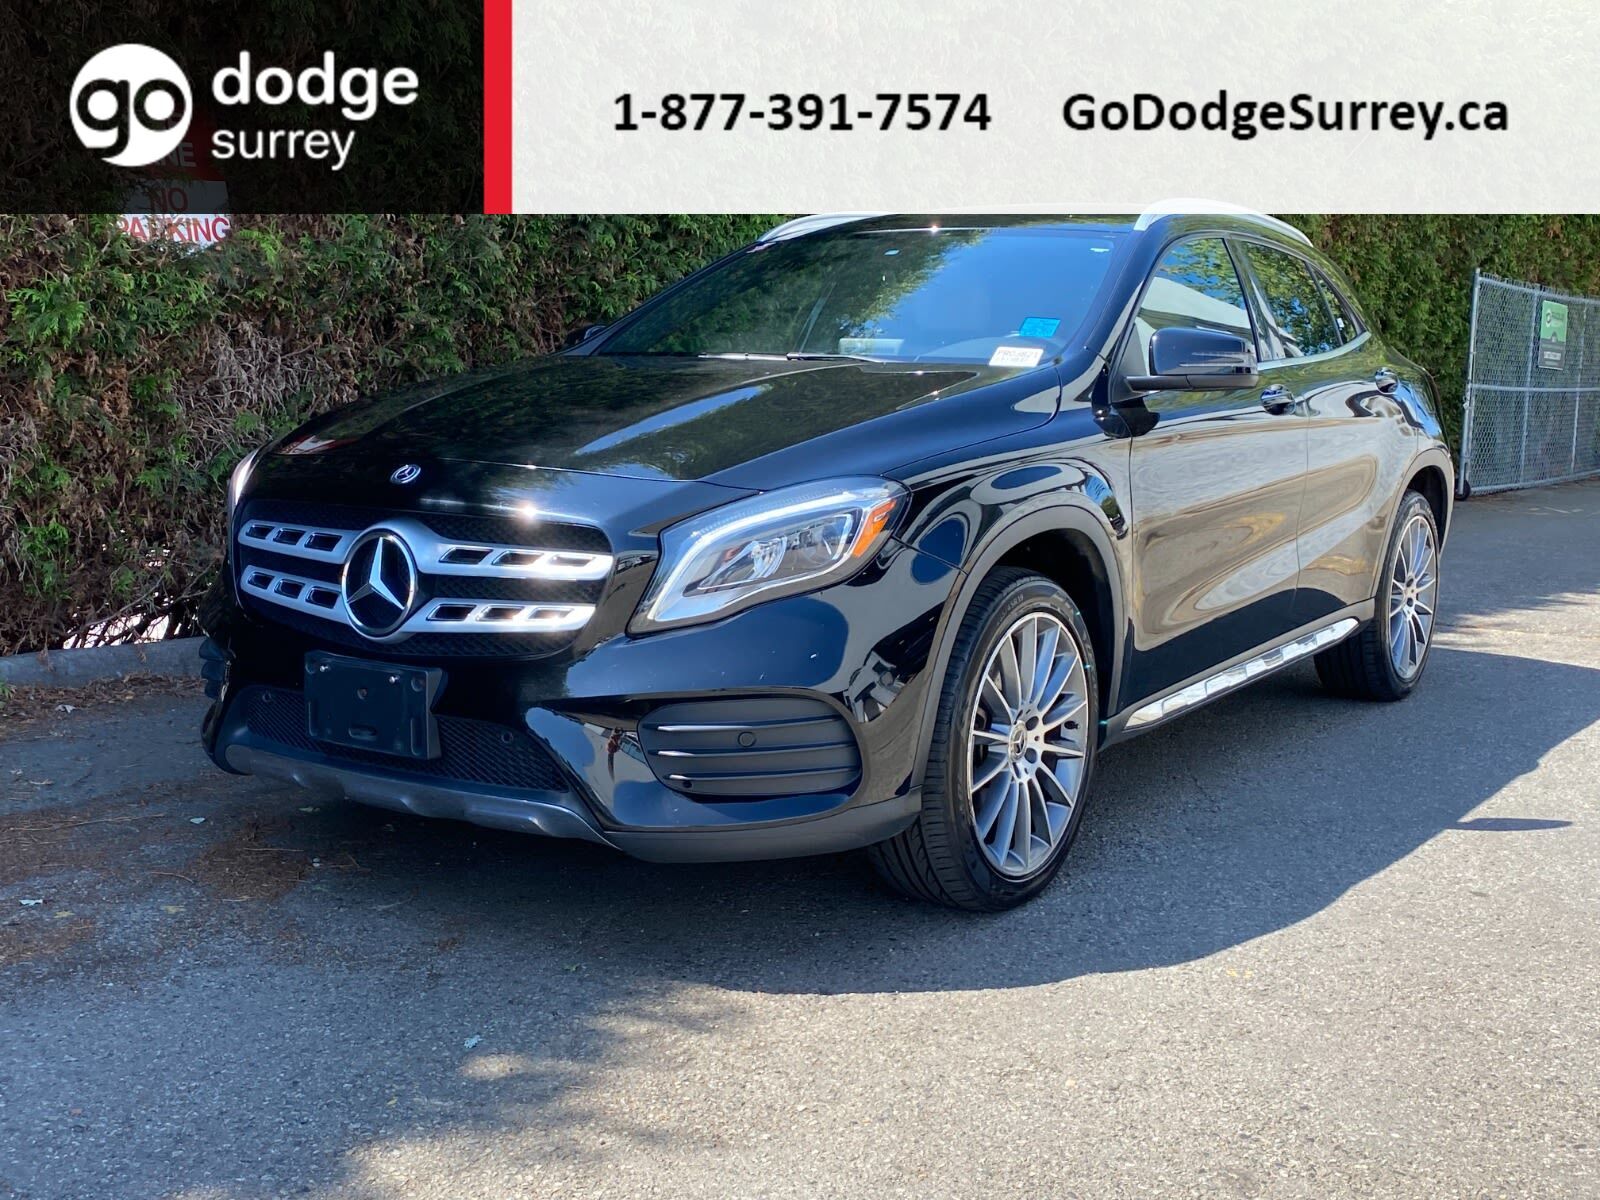 2018 Mercedes-Benz GLA GLA 250 - AWD/LEATHER/REAR VIEW CAM/NO EXTRA FEES